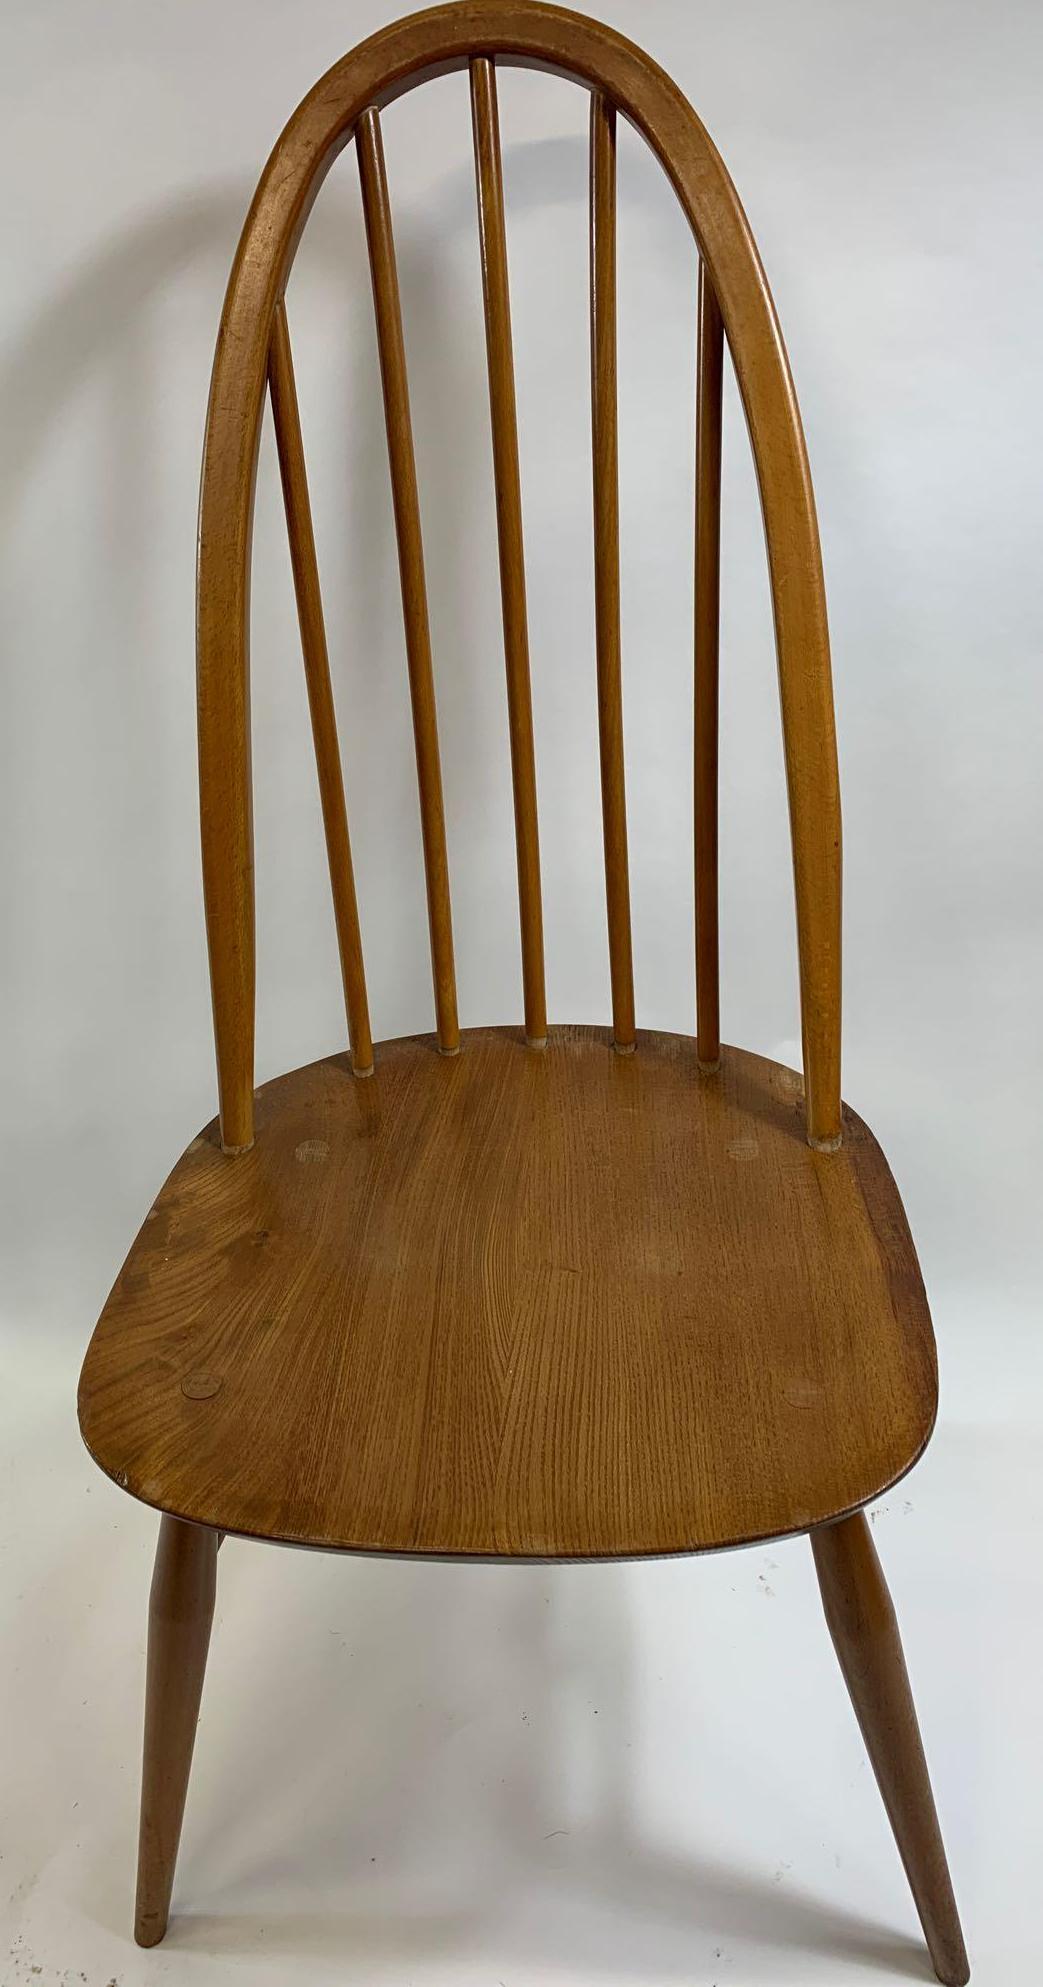 A set of four Ercol chairs and two carvers - Image 2 of 3